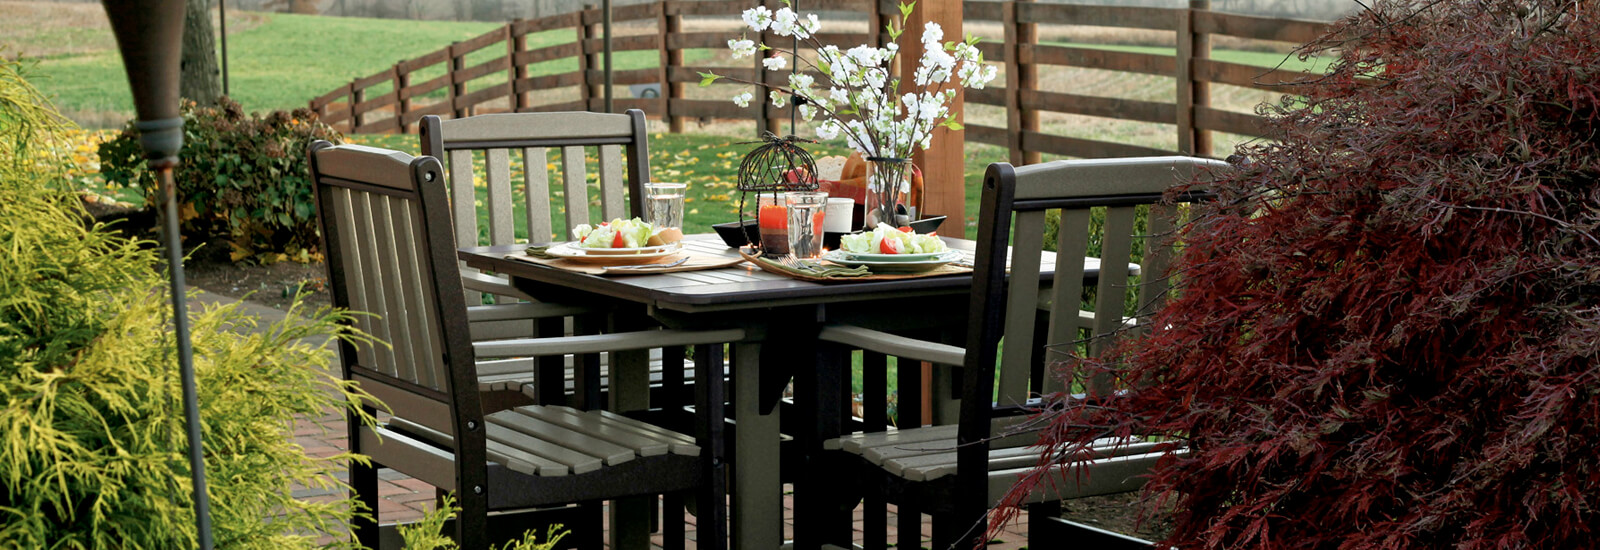 Outdoor Dining Sets starting at $305